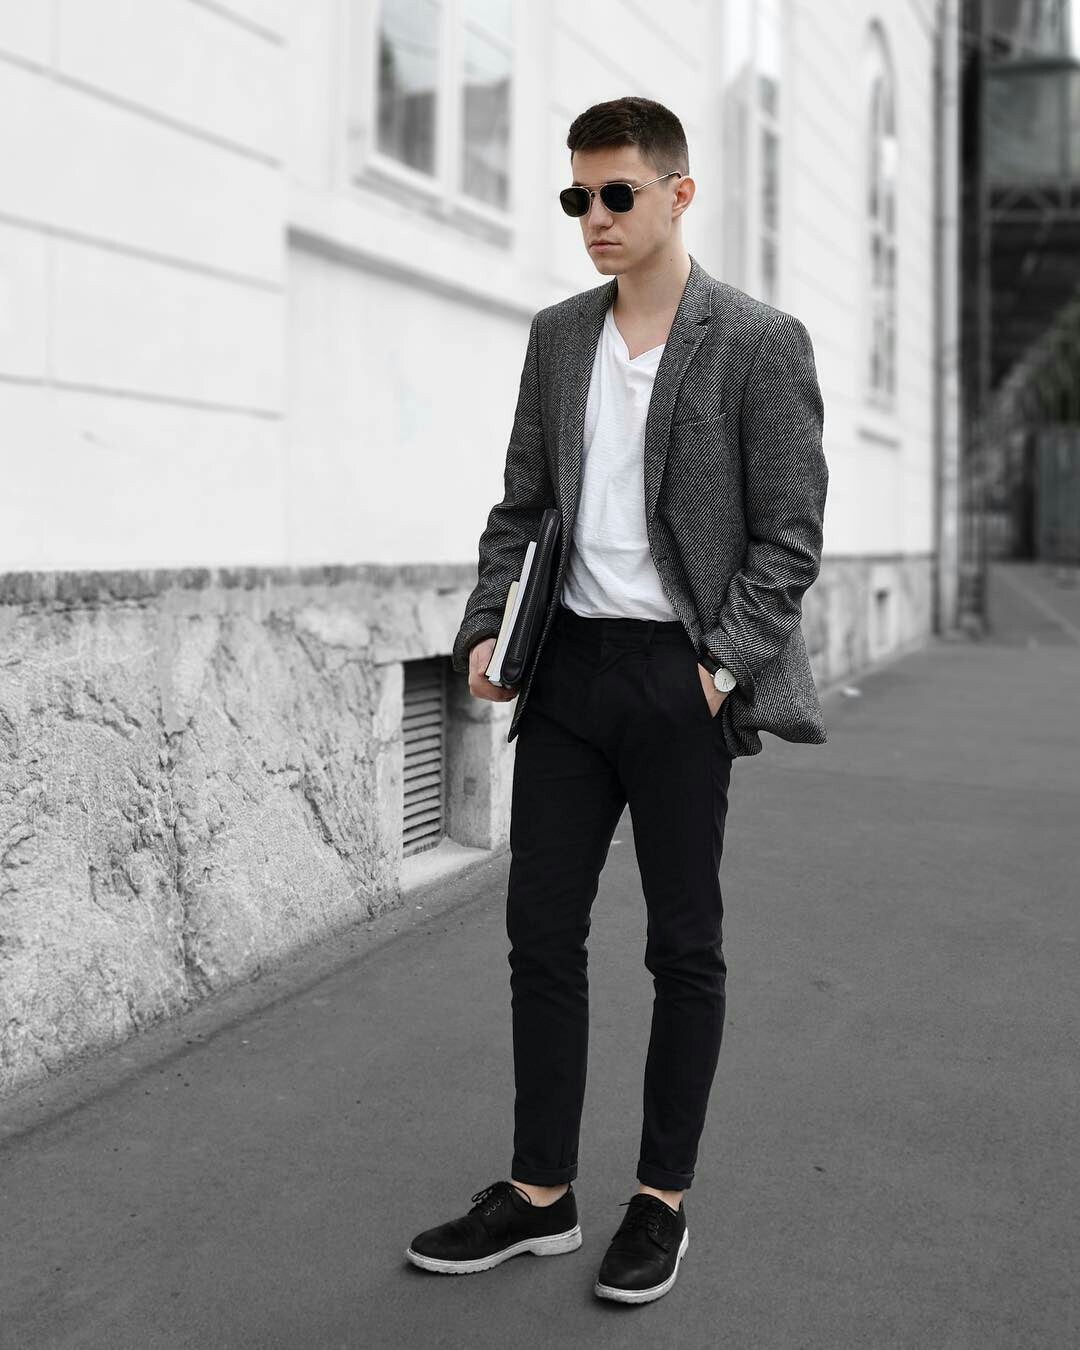 Awesome Minimalist Looks For Men – LIFESTYLE BY PS